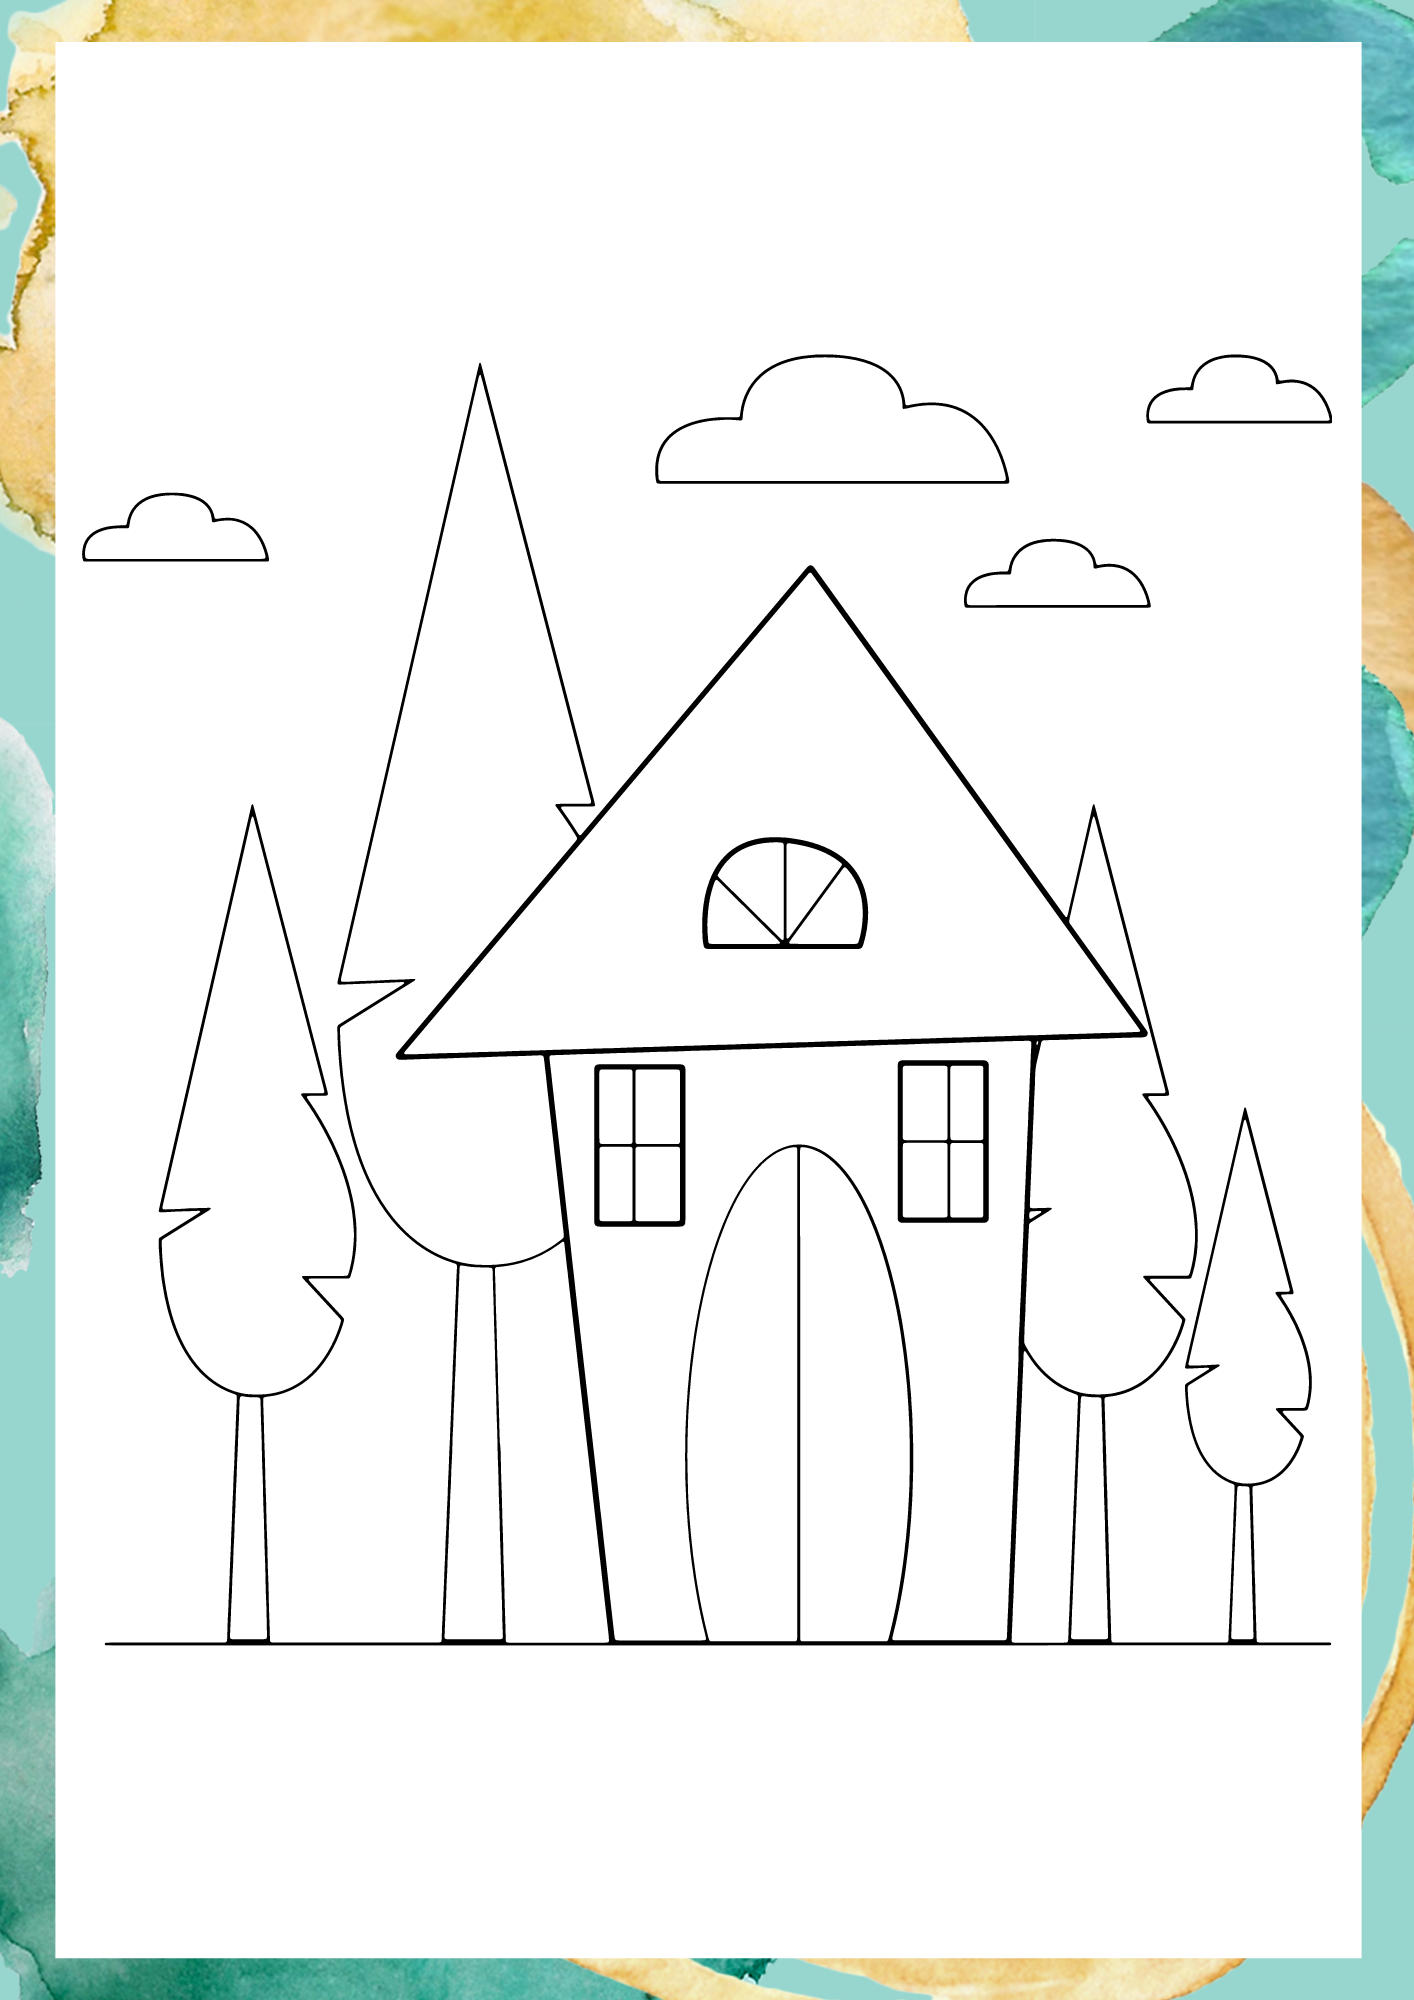 house coloring pages, home coloring pages, coloring page, coloring page for toddlers, Coloring Page, coloring sheet, happy color, colouring, free coloring pages, coloring pages for kids, printable coloring pages, cute coloring pages, colouring pages, colouring to print, free printable coloring pages, free coloring pages for kids, easy coloring pages, coloring sheets